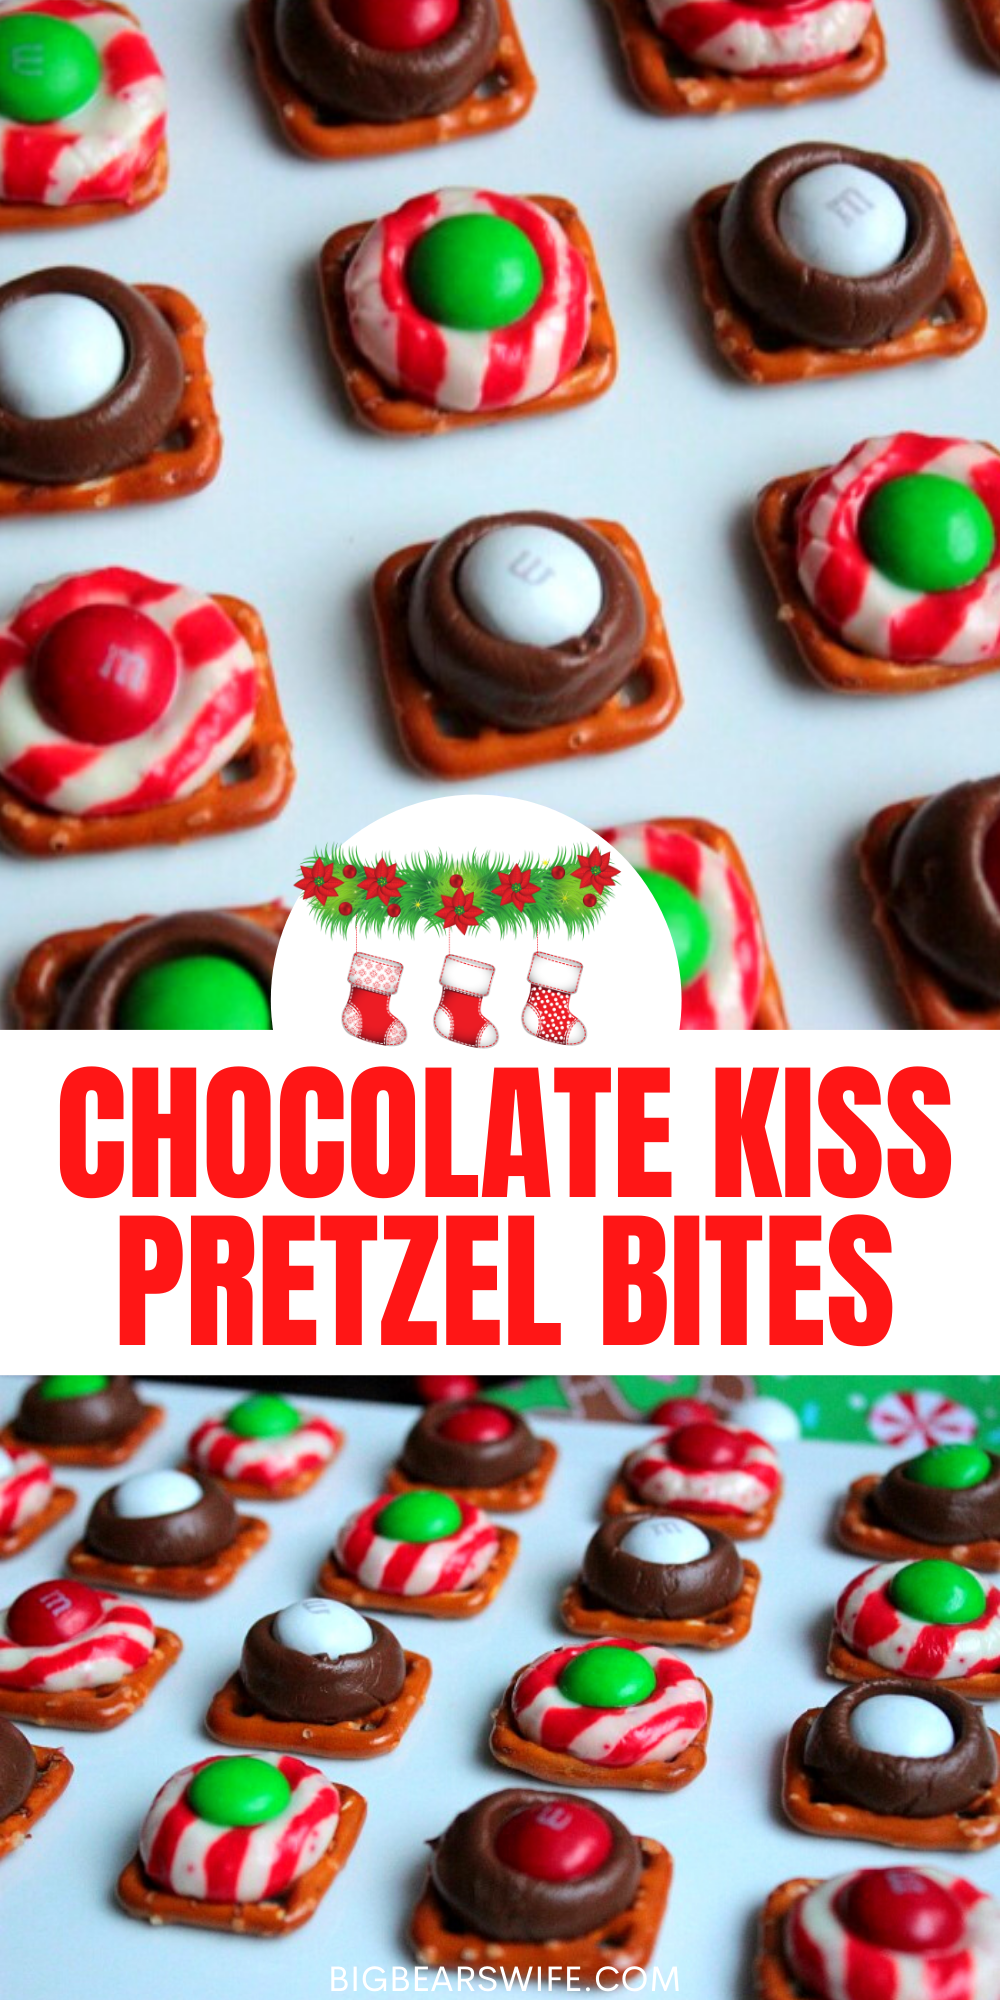   These Chocolate Kiss Pretzel Bites are little pretzel squares that are topped with chocolate kisses, melted in the oven and then topped with sweet chocolate candies! They're the perfect sweet and salty dessert! via @bigbearswife